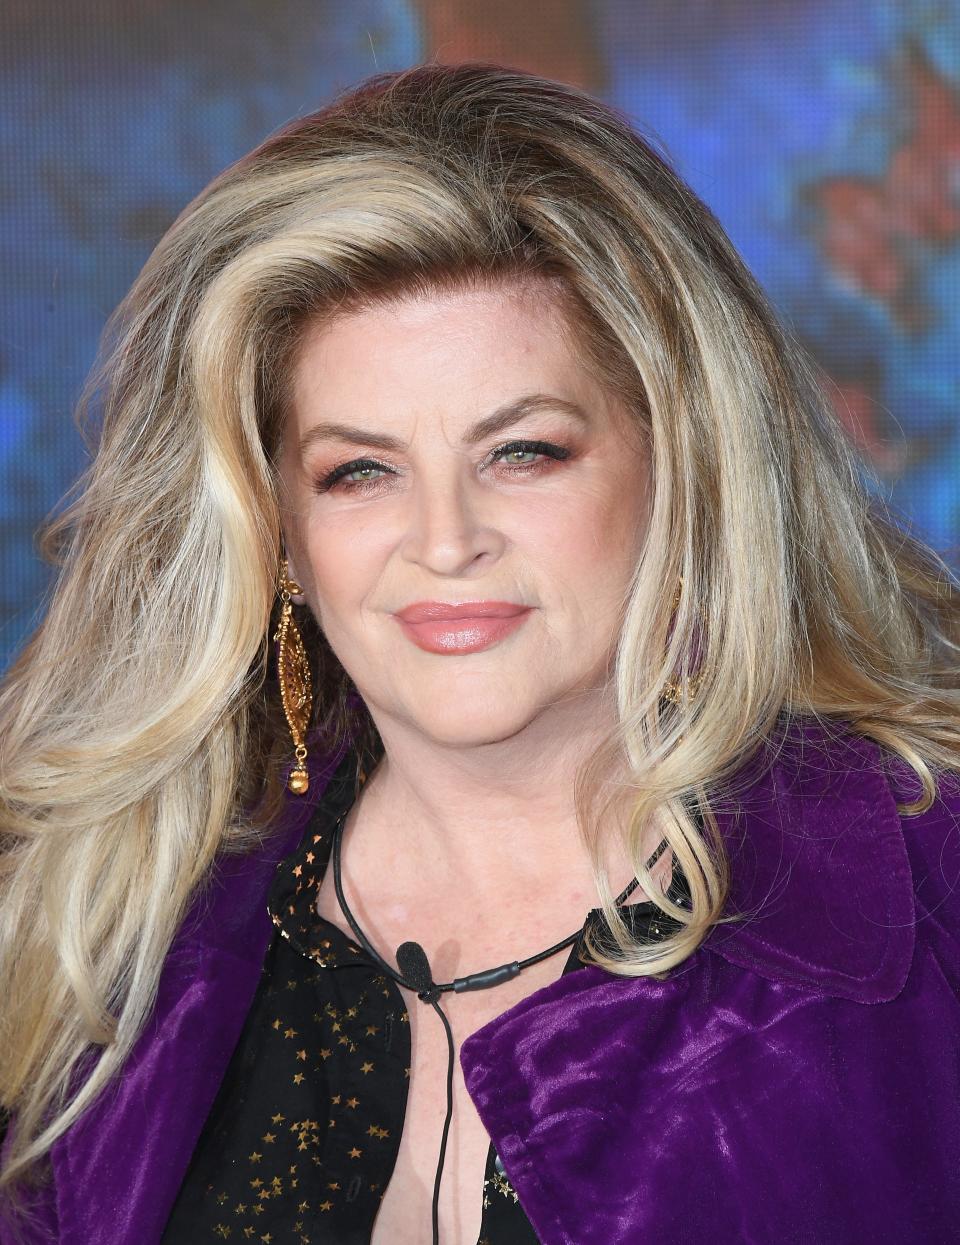 Kirstie Alley's items are available in an estate sale.